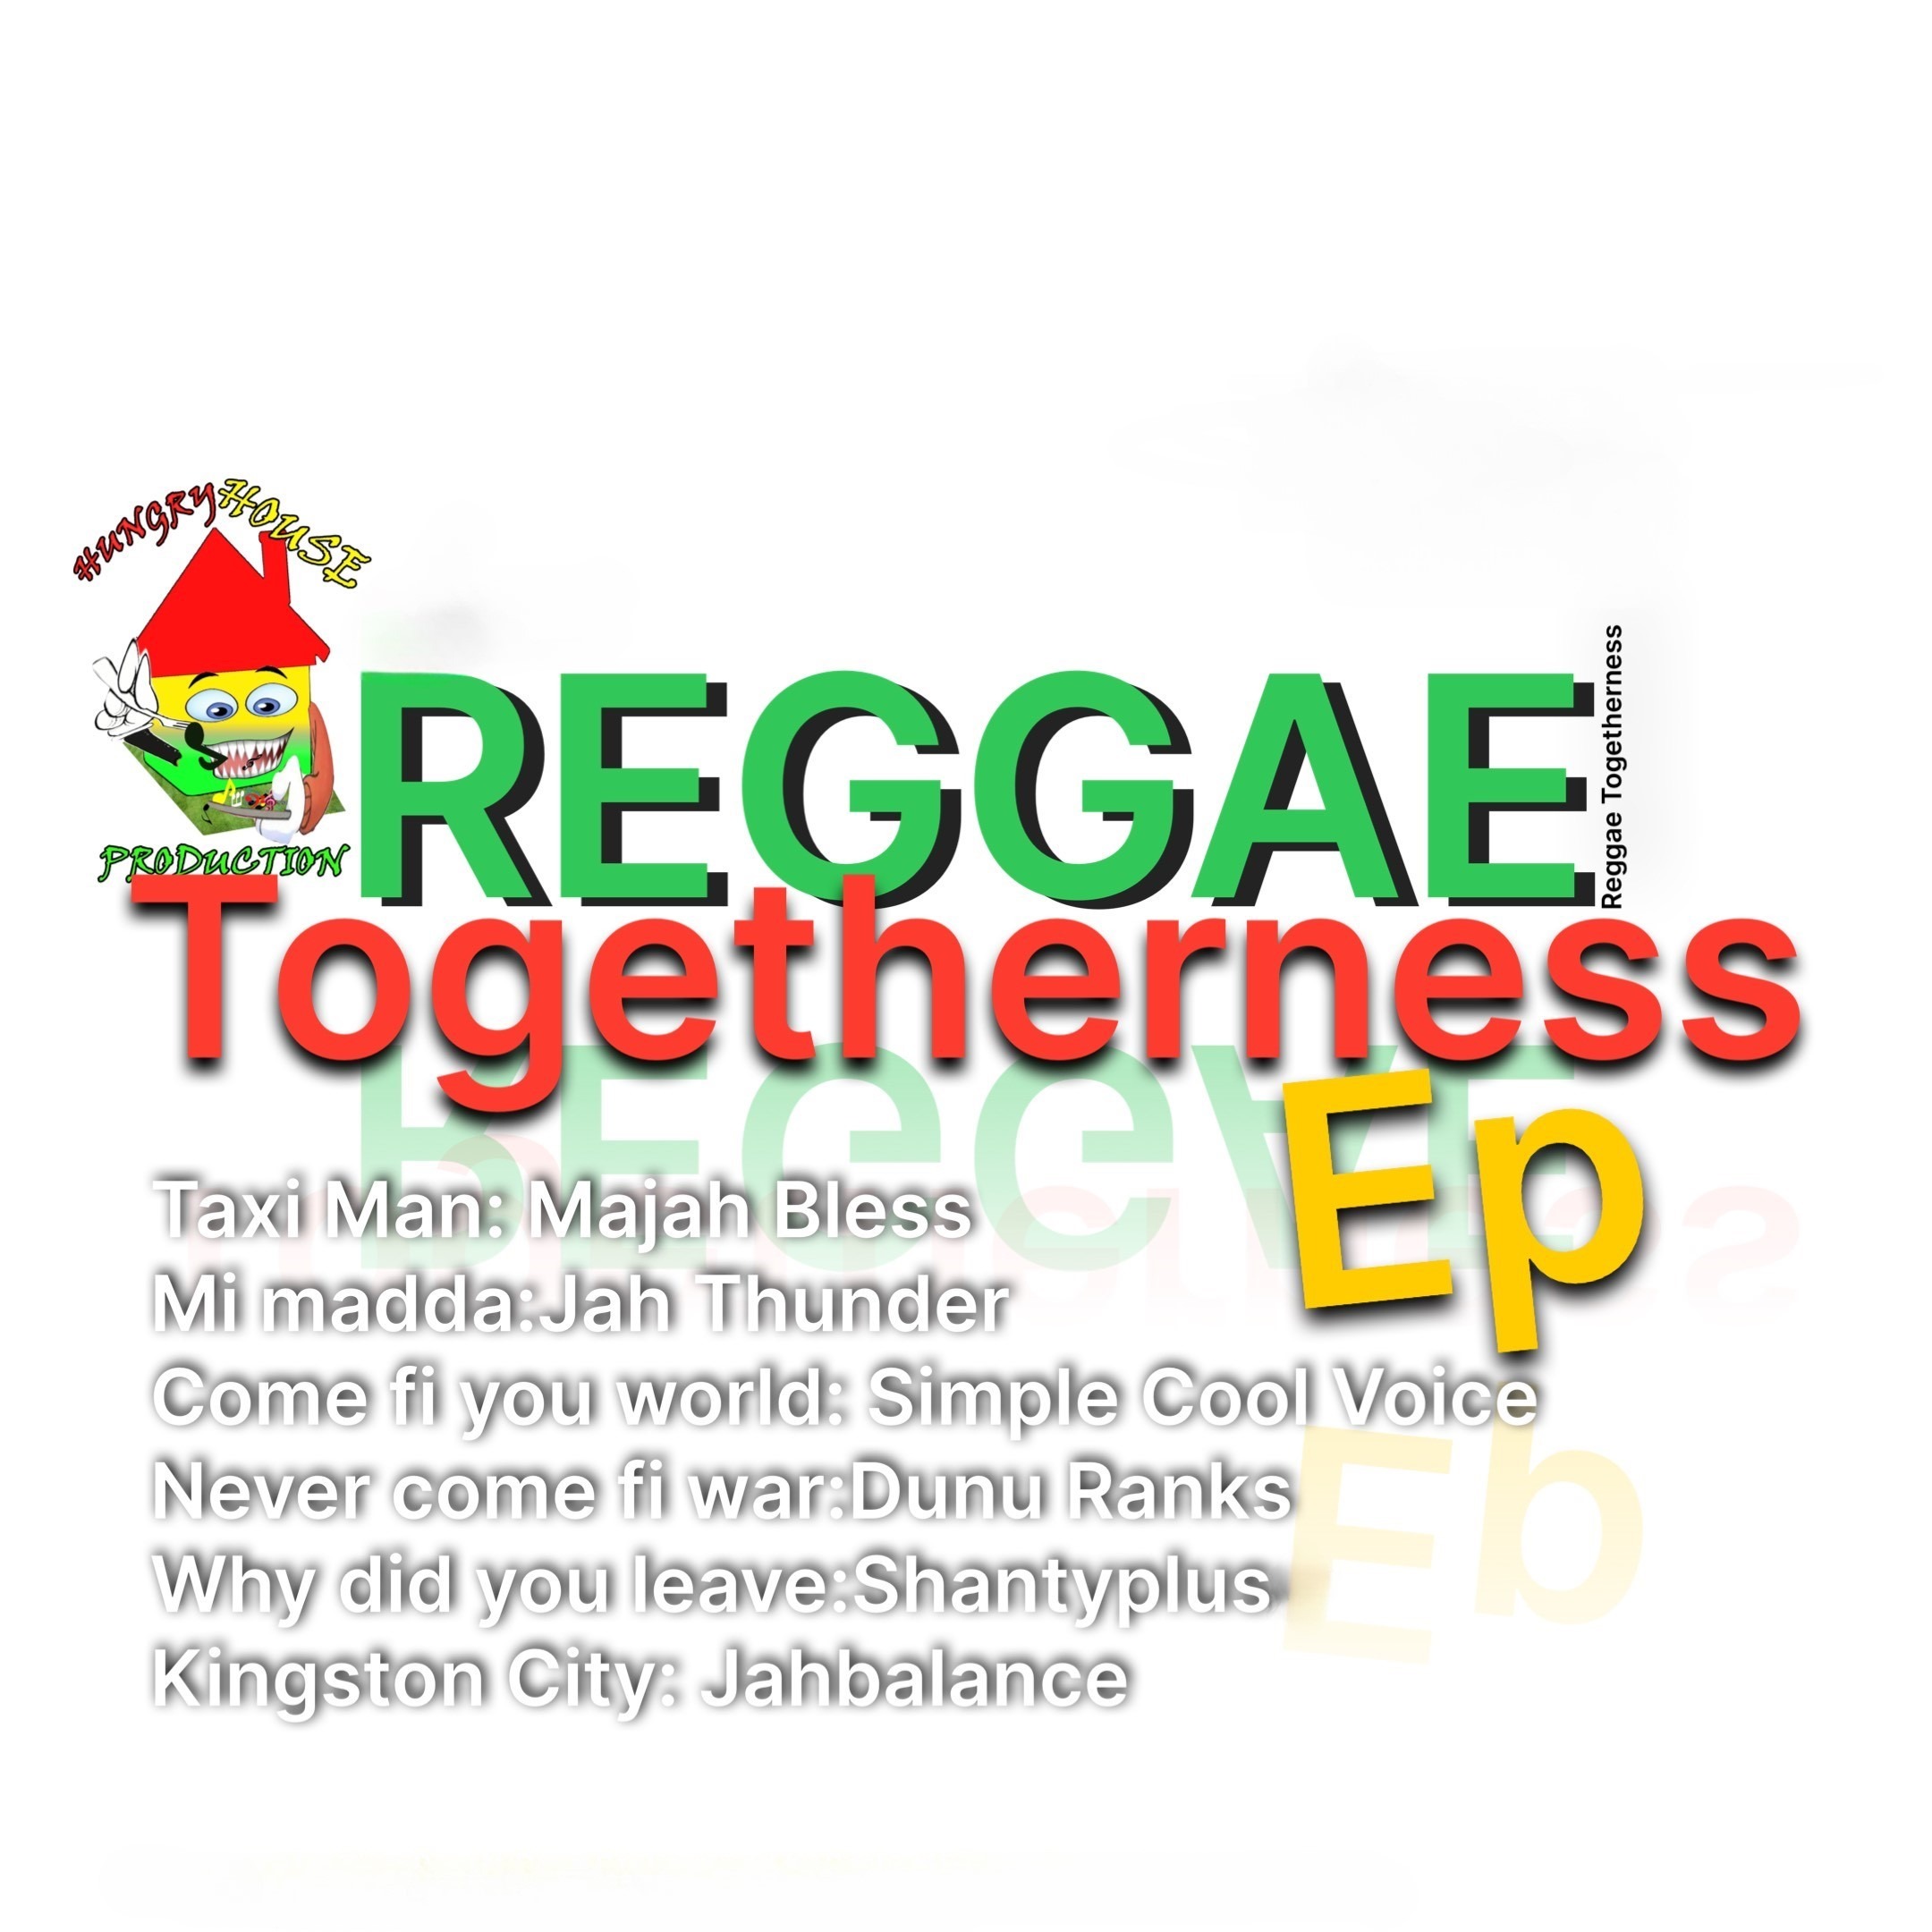 An Authentic Blend of Reggae and Dancehall - Hungry House Production Delivers an Unforgettable New Record "Reggae Togetherness"